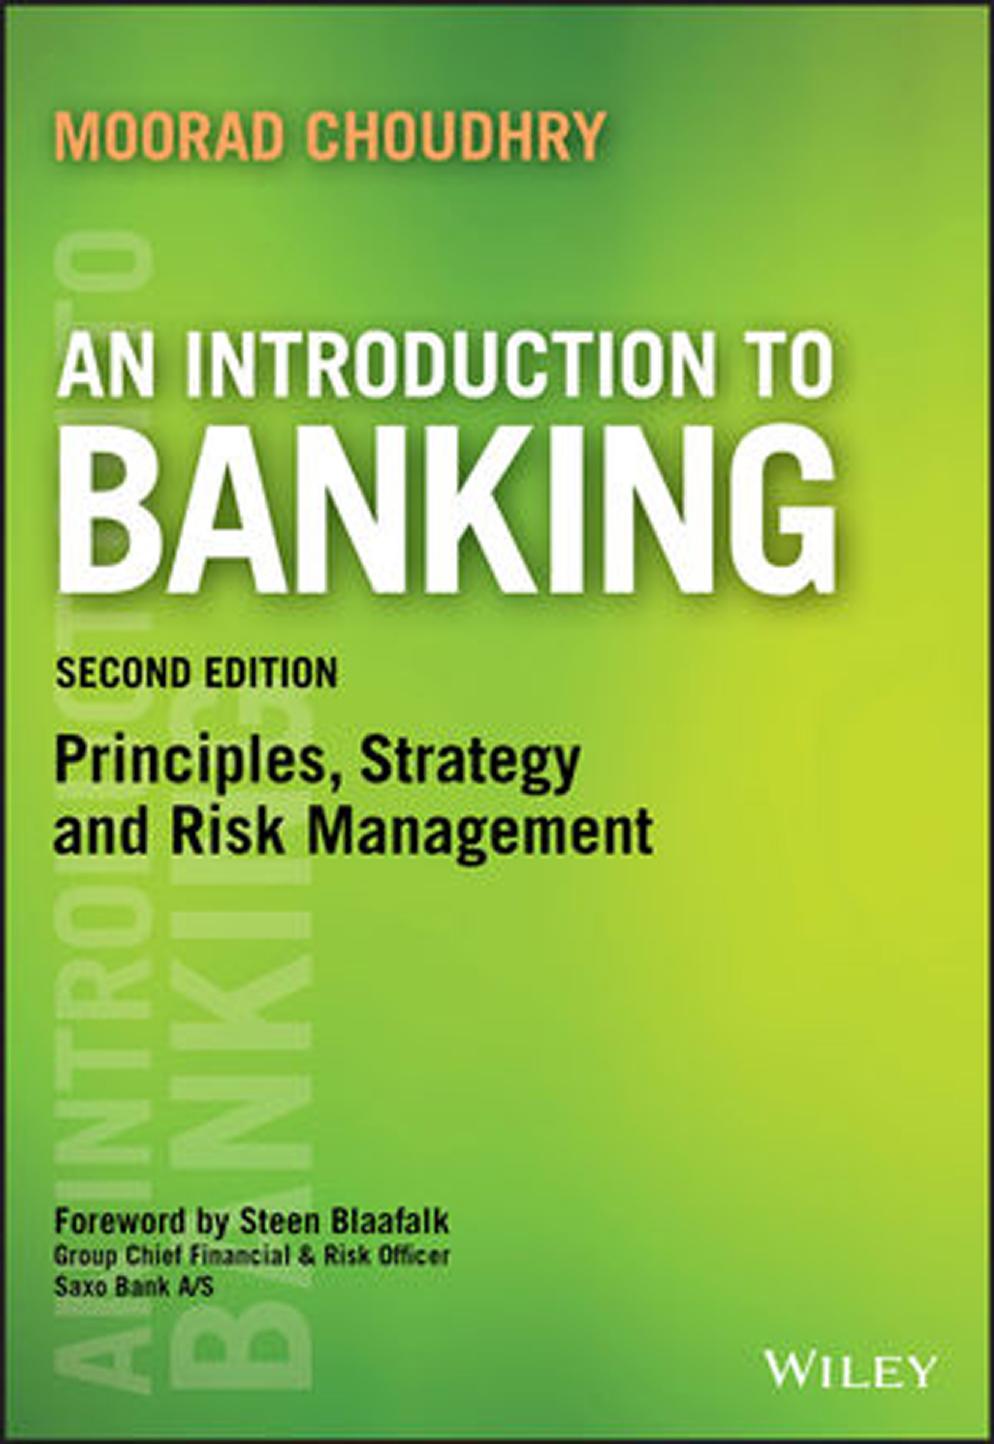 An Introduction to Banking: Principles, Strategy and Risk Management, Second Edition